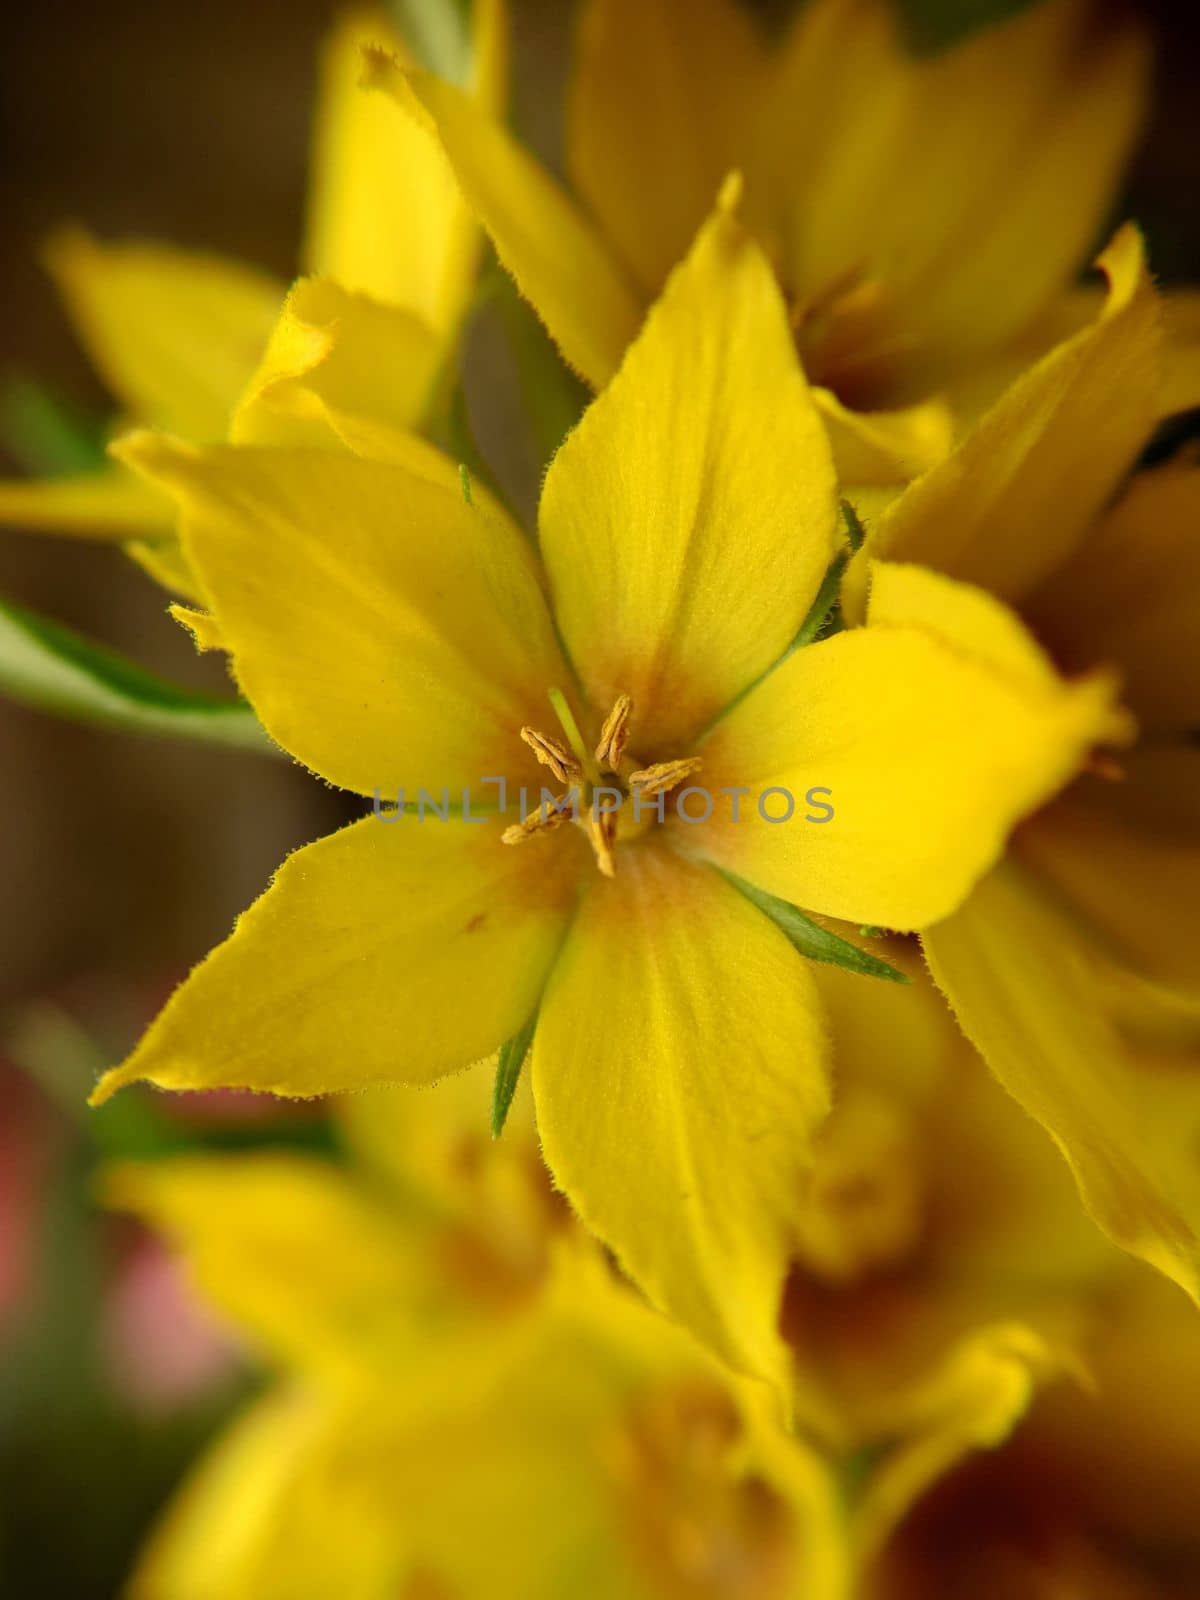 Background image of a yellow flower in close-up.Macro photography.Texture or background.Selective focus.